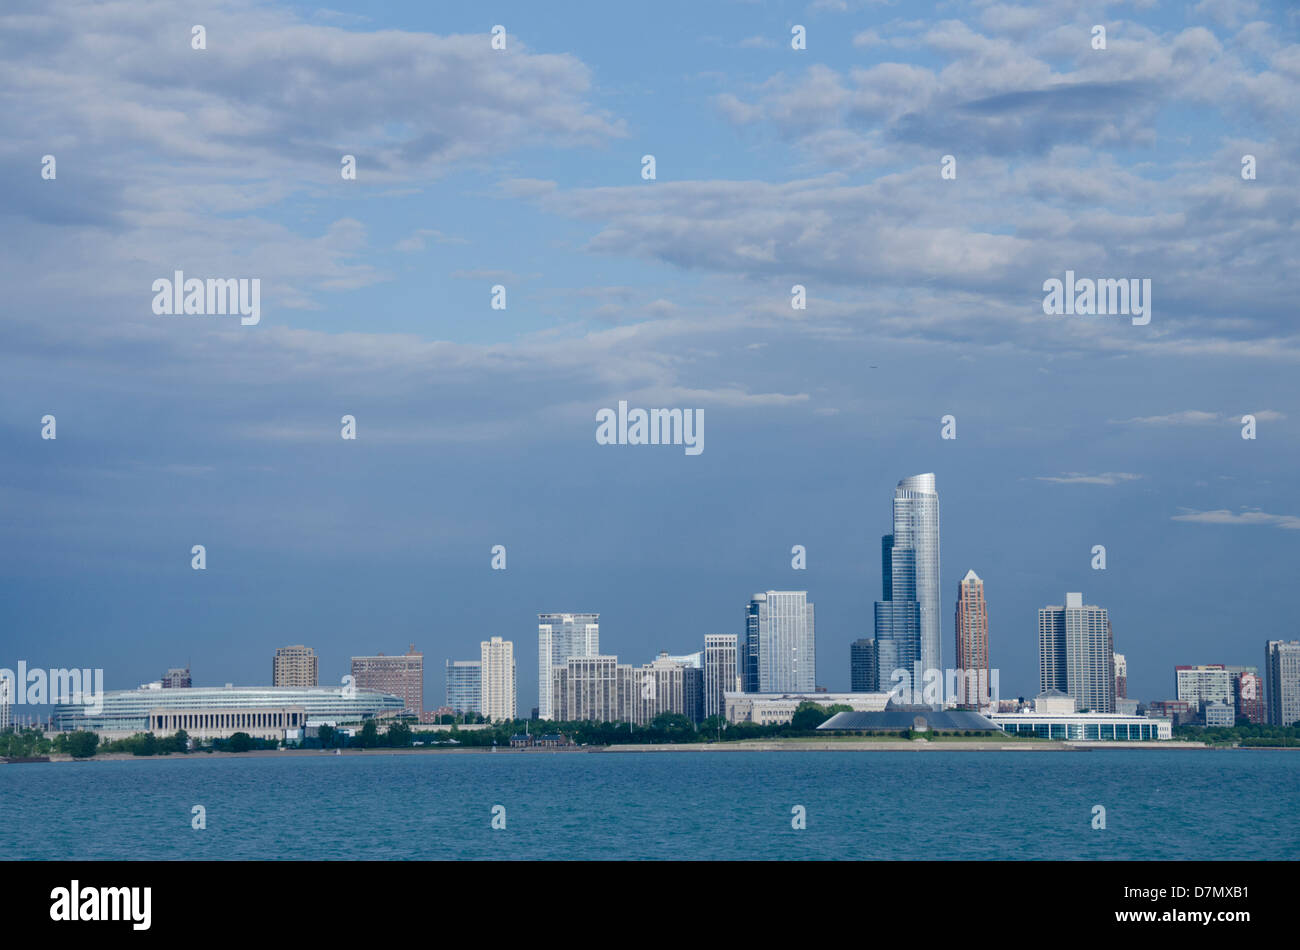 Illinois, Chicago. Downtown city skyline view from lake Michigan. Stock Photo